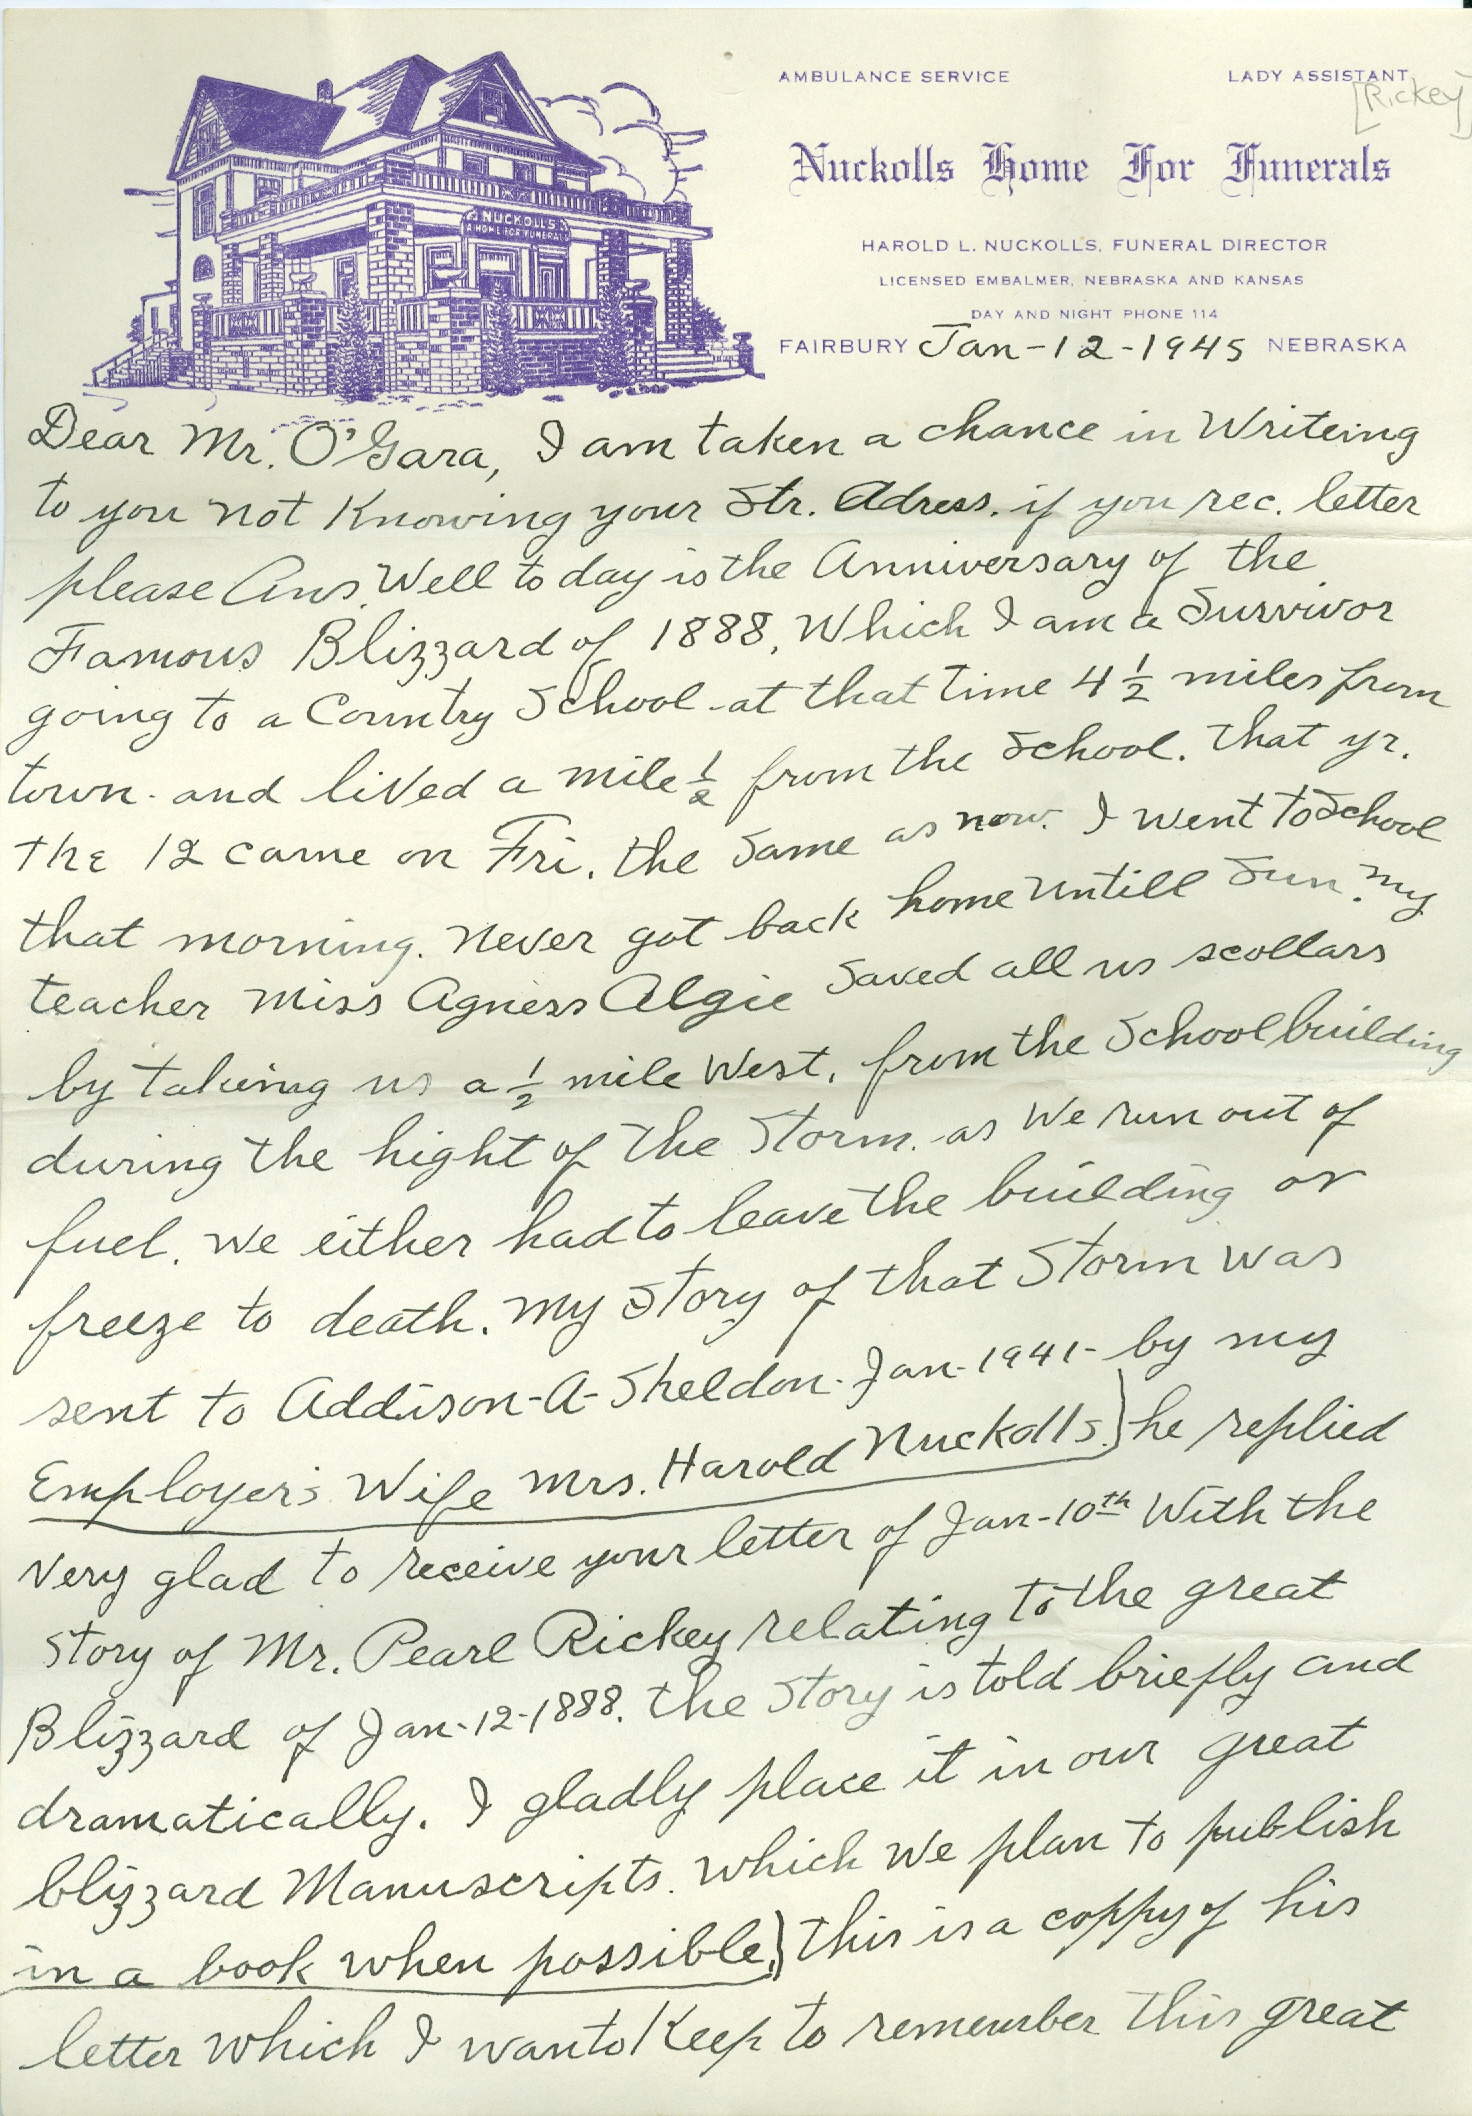 Letter by Pearl F. Rickey, p. 1 (NSHS RG3658.AM)